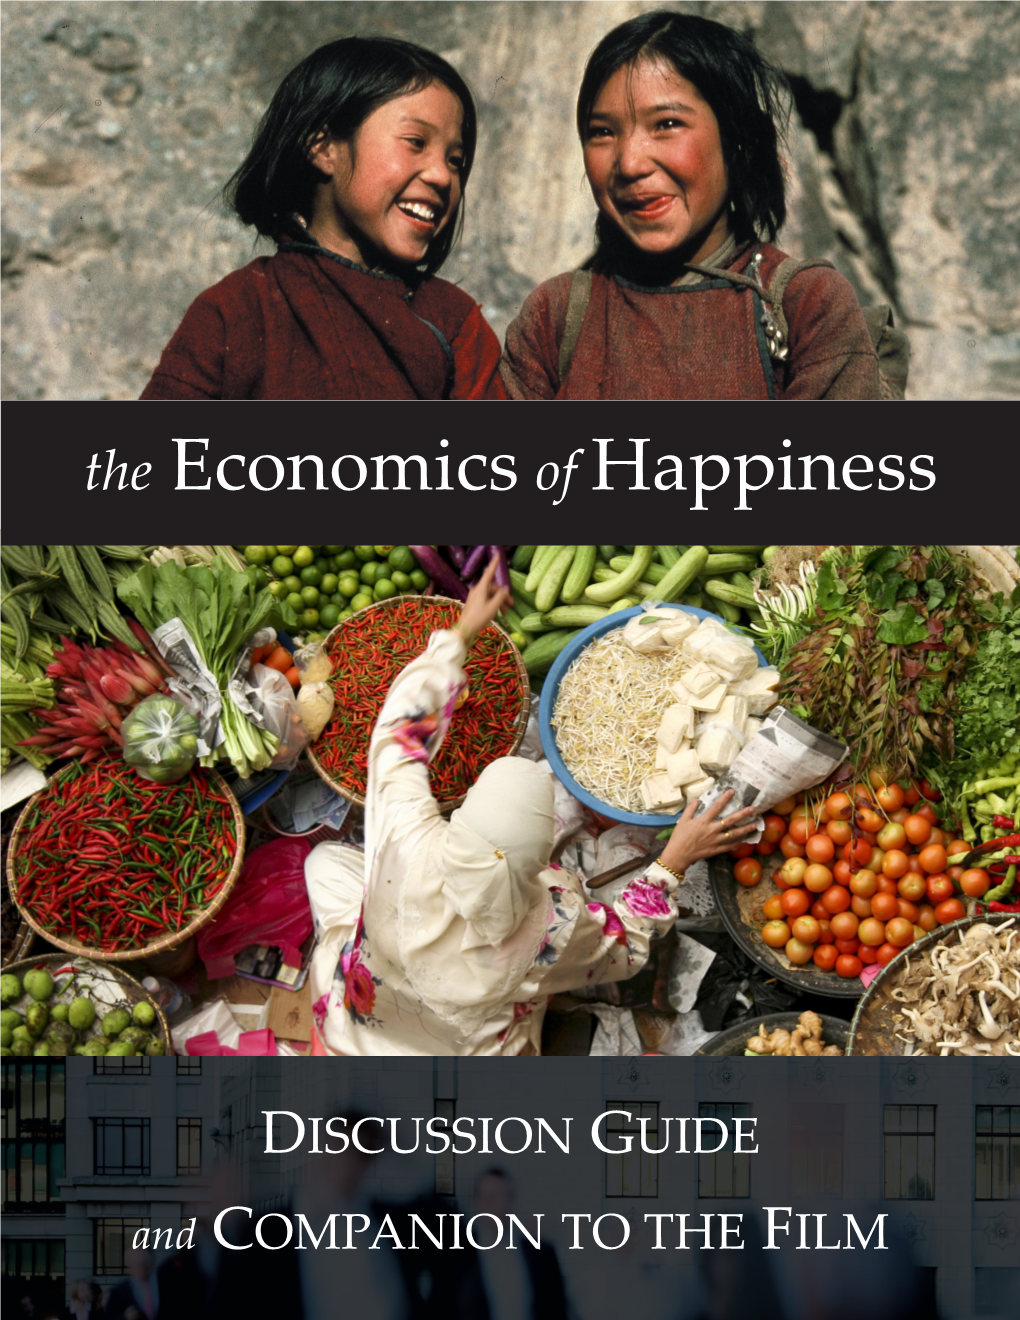 'The Economics of Happiness' Film Discussion Guide